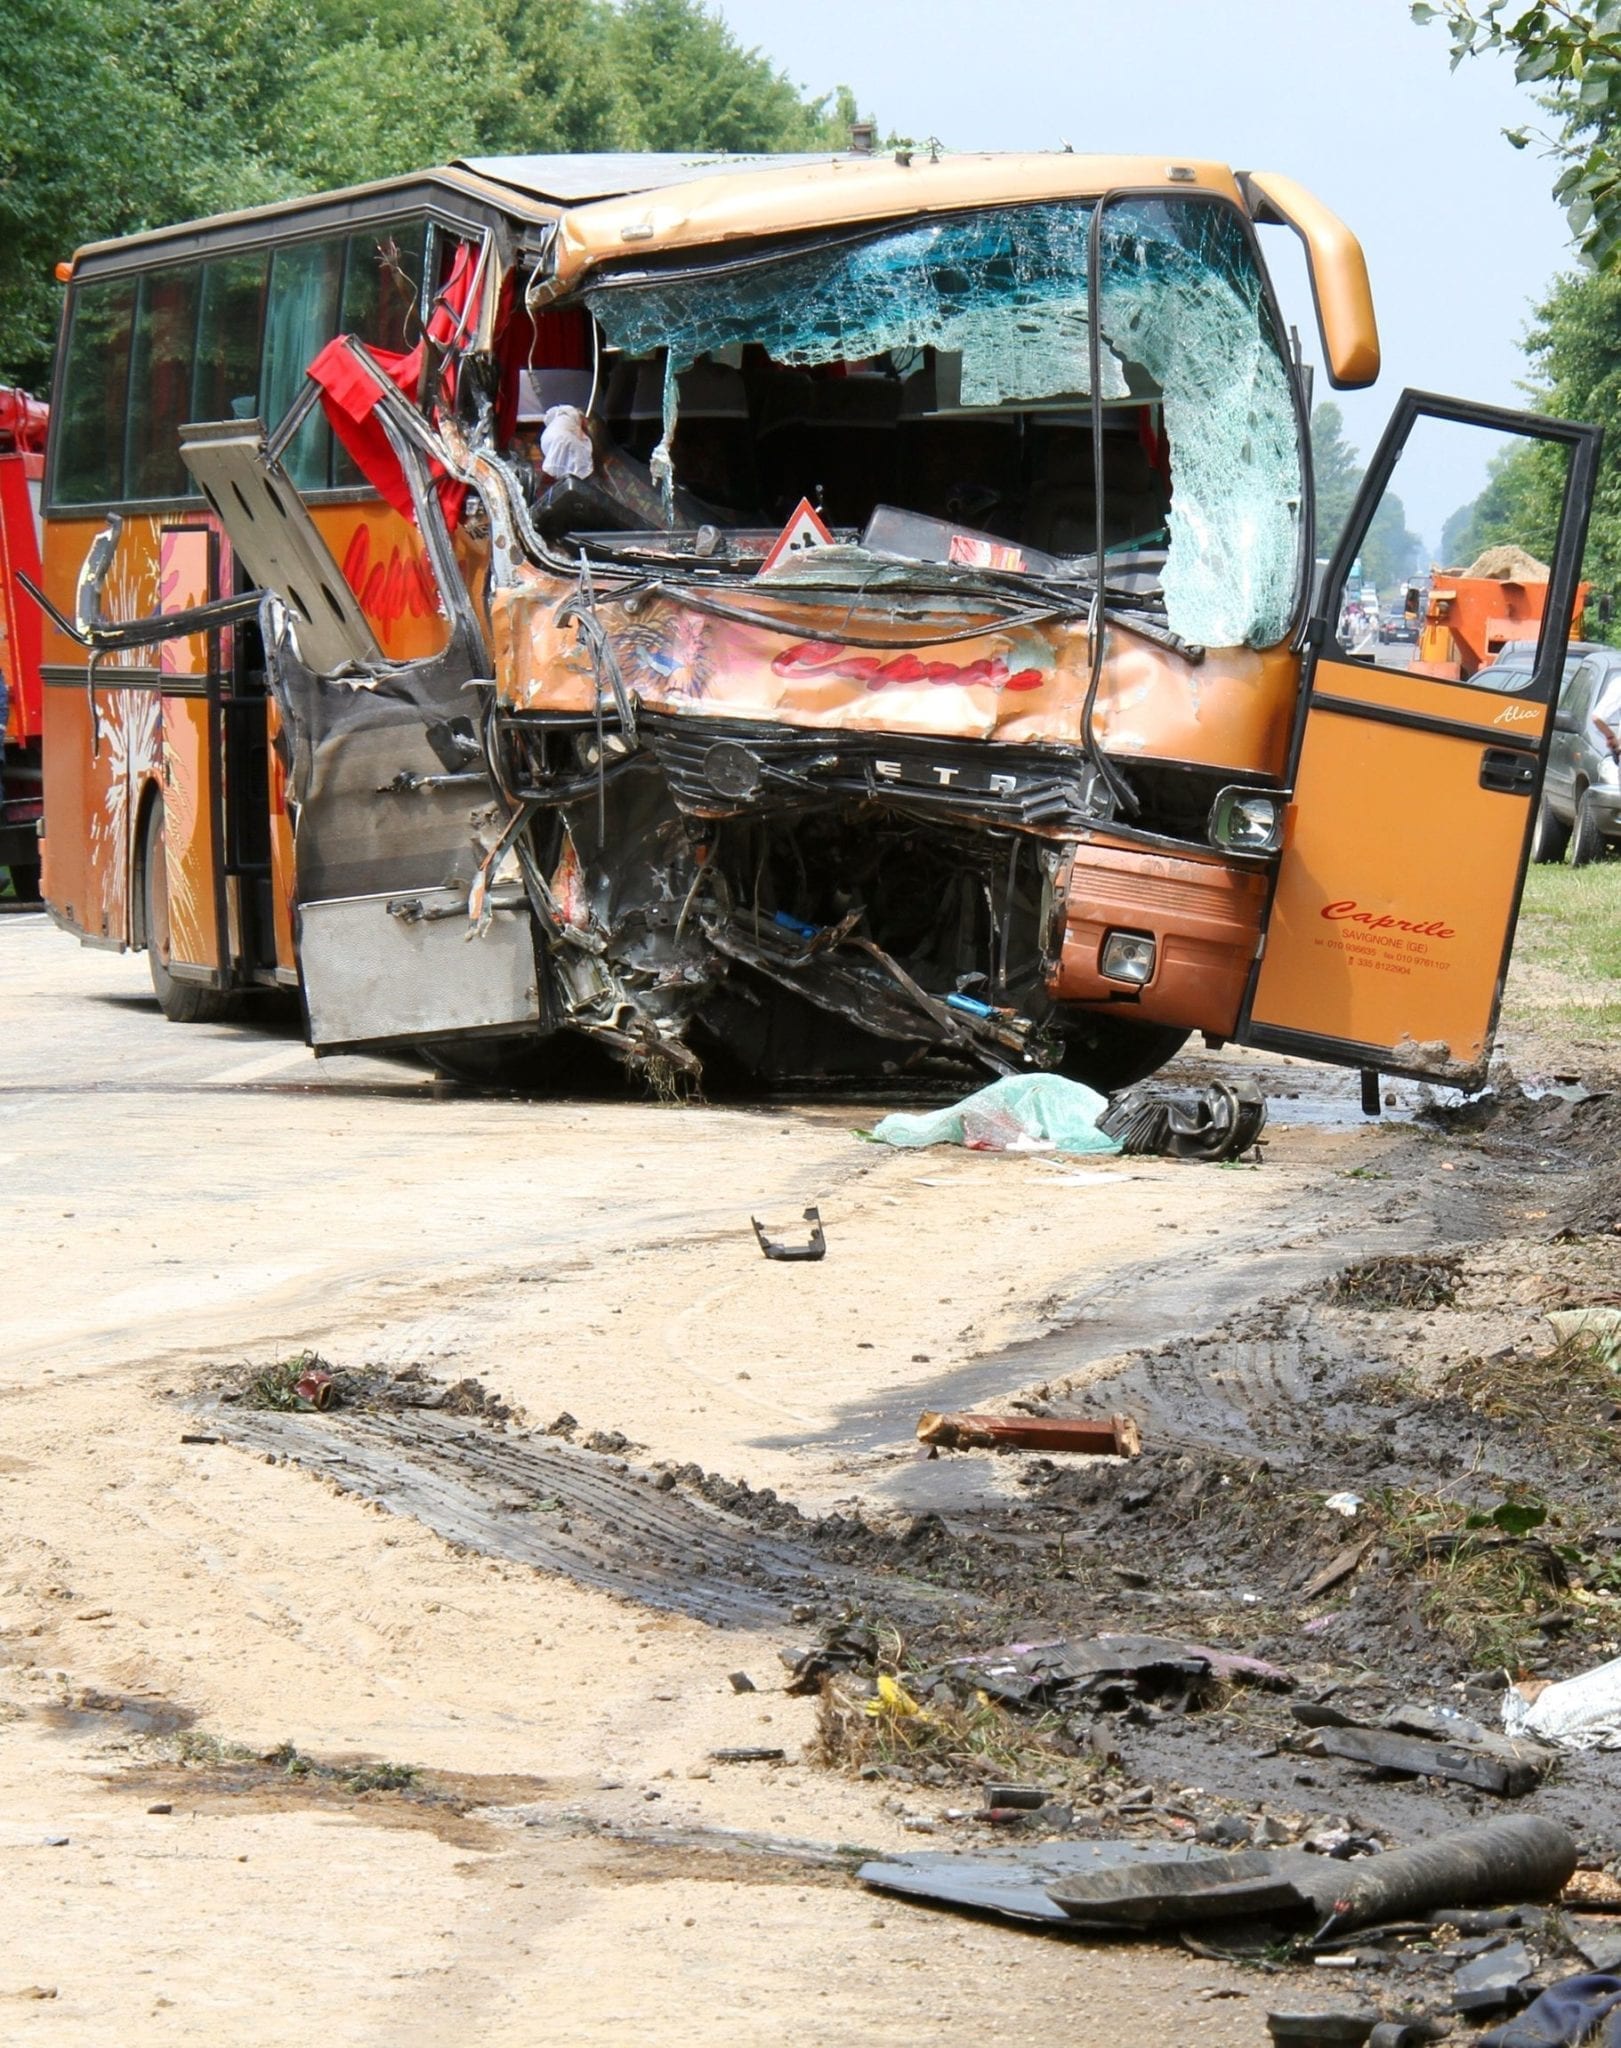 Revisiting Bus Safety Concerns in the Aftermath of a Gruesome Accident